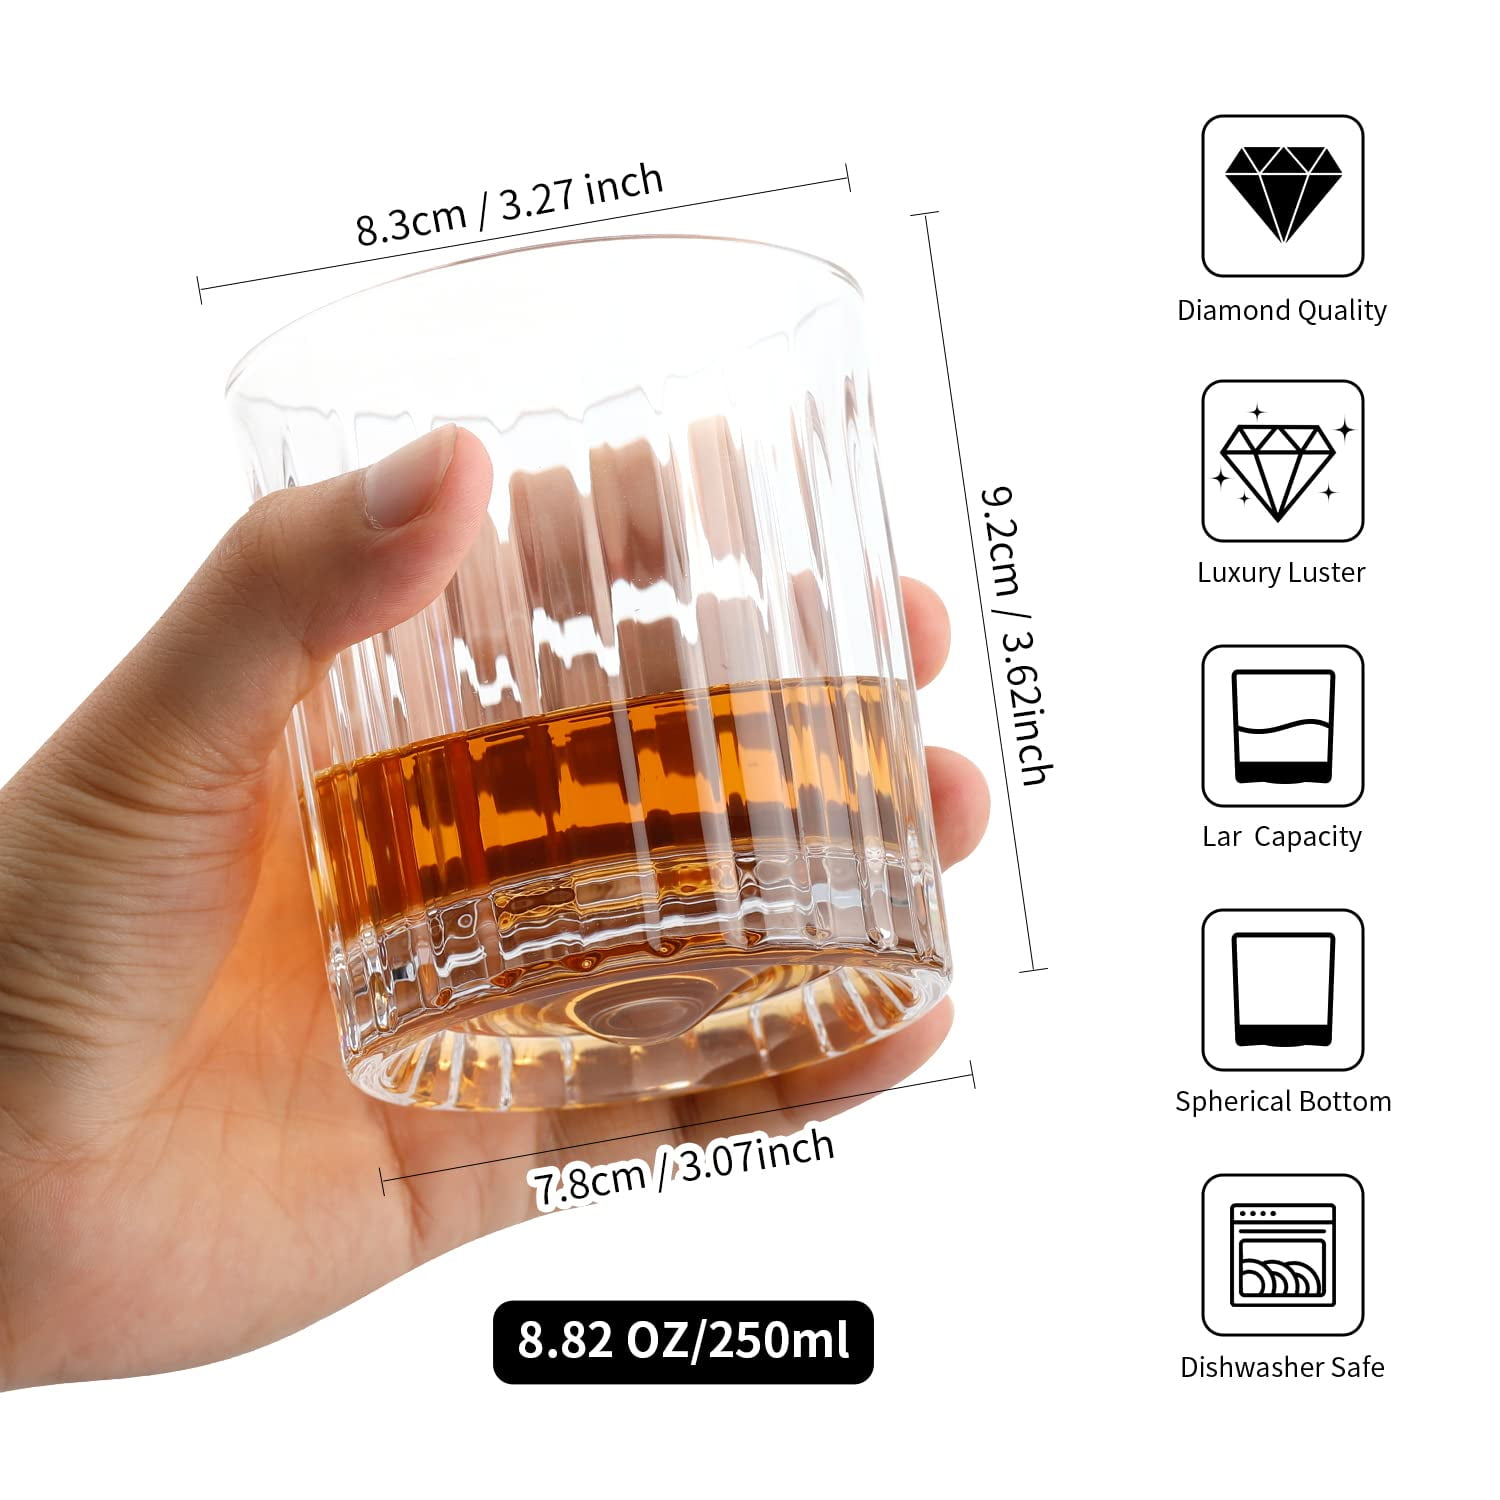 Whiskey Glasses with 4 Iceball molds and a Luxury Box, Old Fashioned  Whiskey Glasses, Gifts for Dad …See more Whiskey Glasses with 4 Iceball  molds and